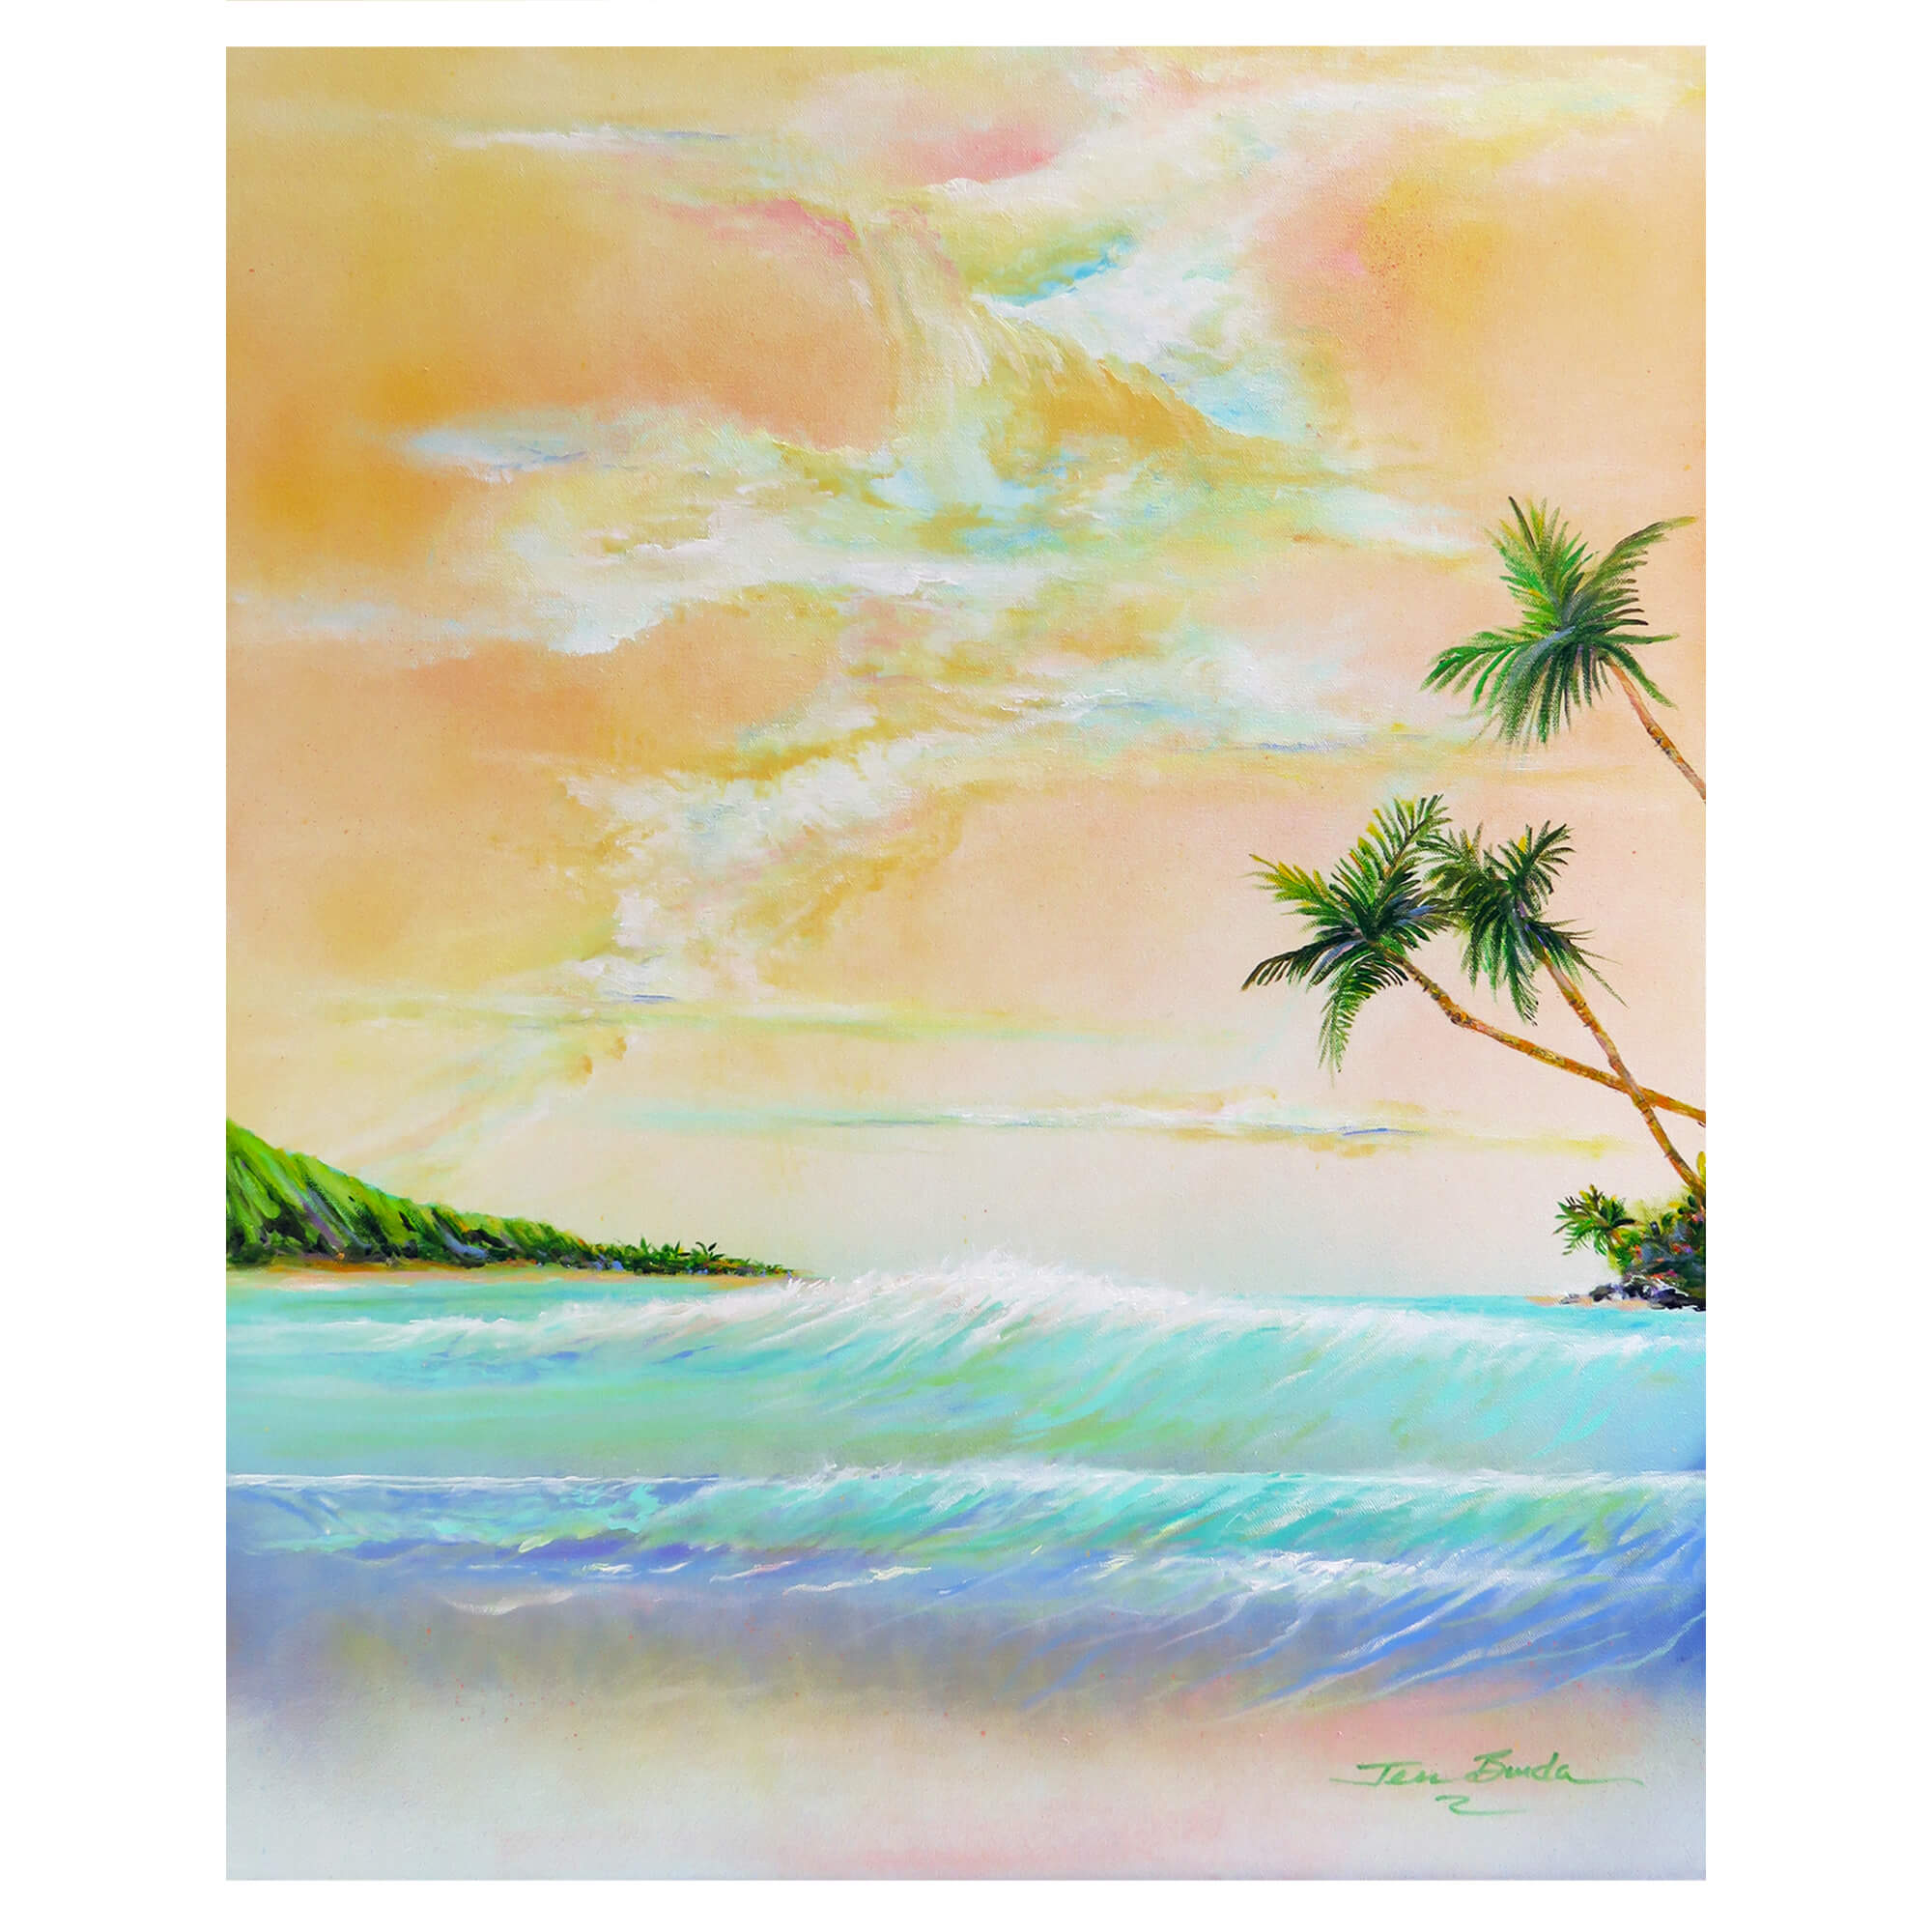 A seascape with coconut trees and distant mountain by Hawaii artist Jess Burda